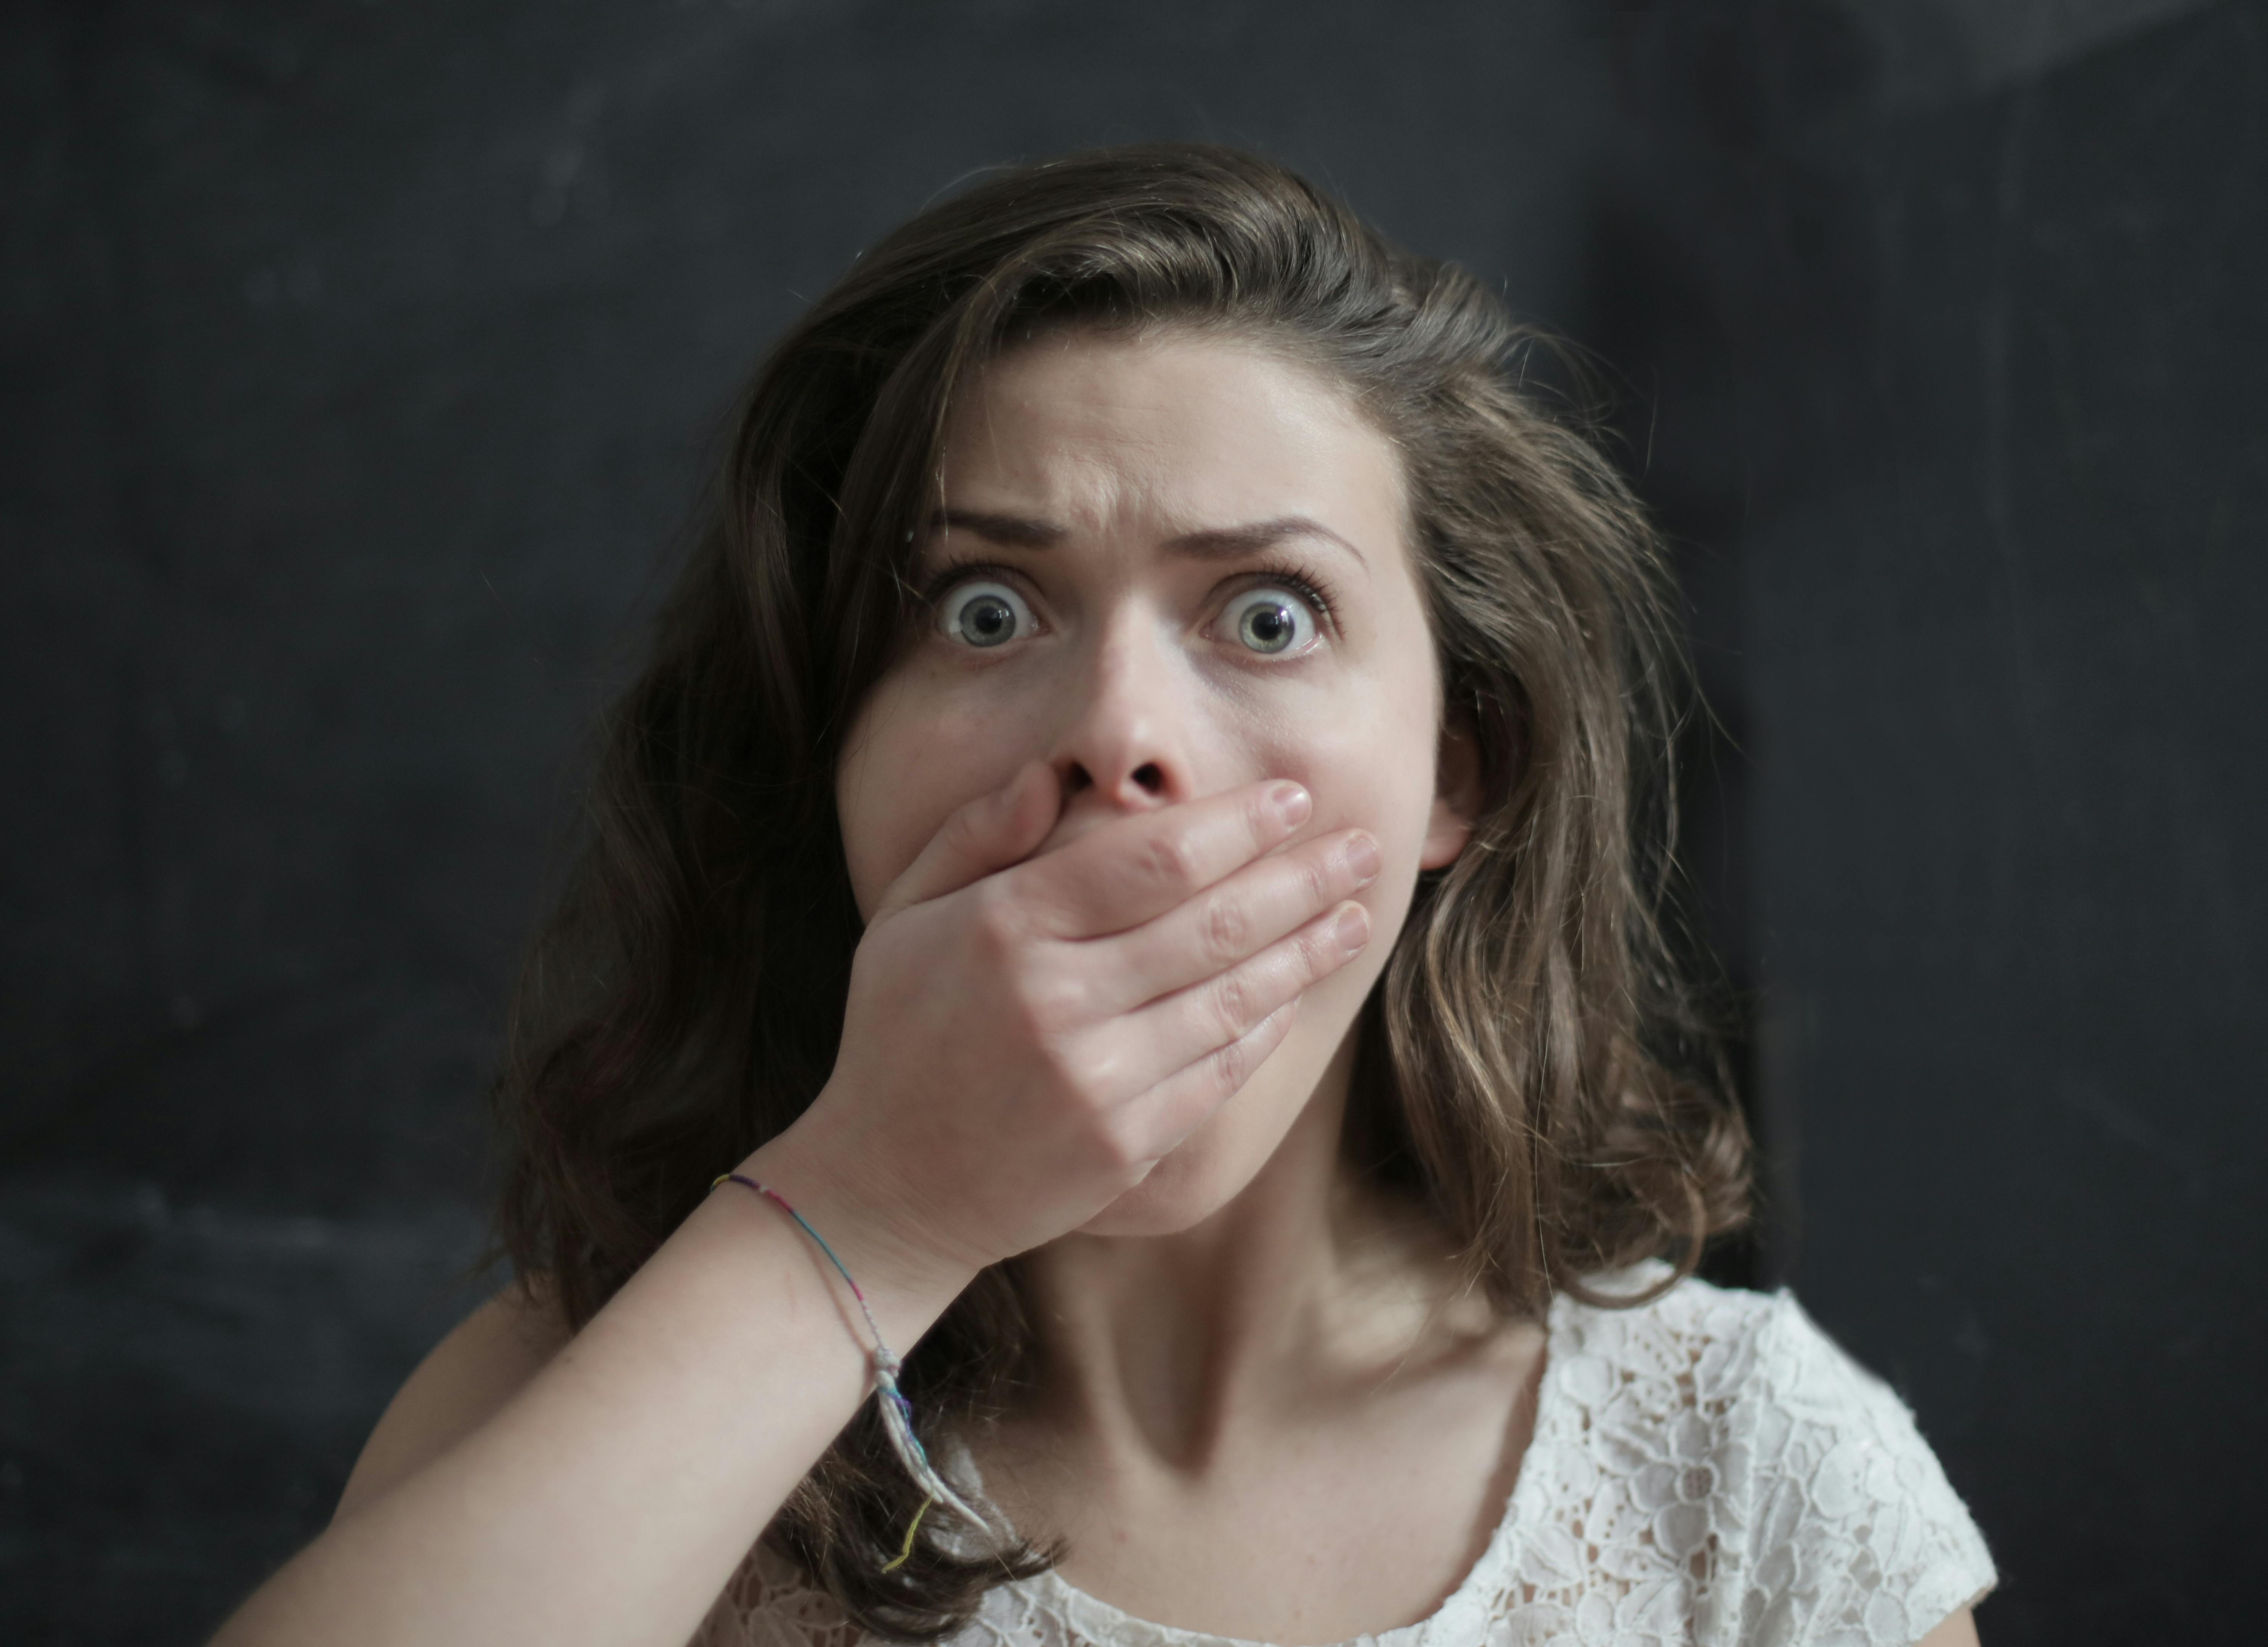 A woman covering her mouth in shock | Source: Pexels